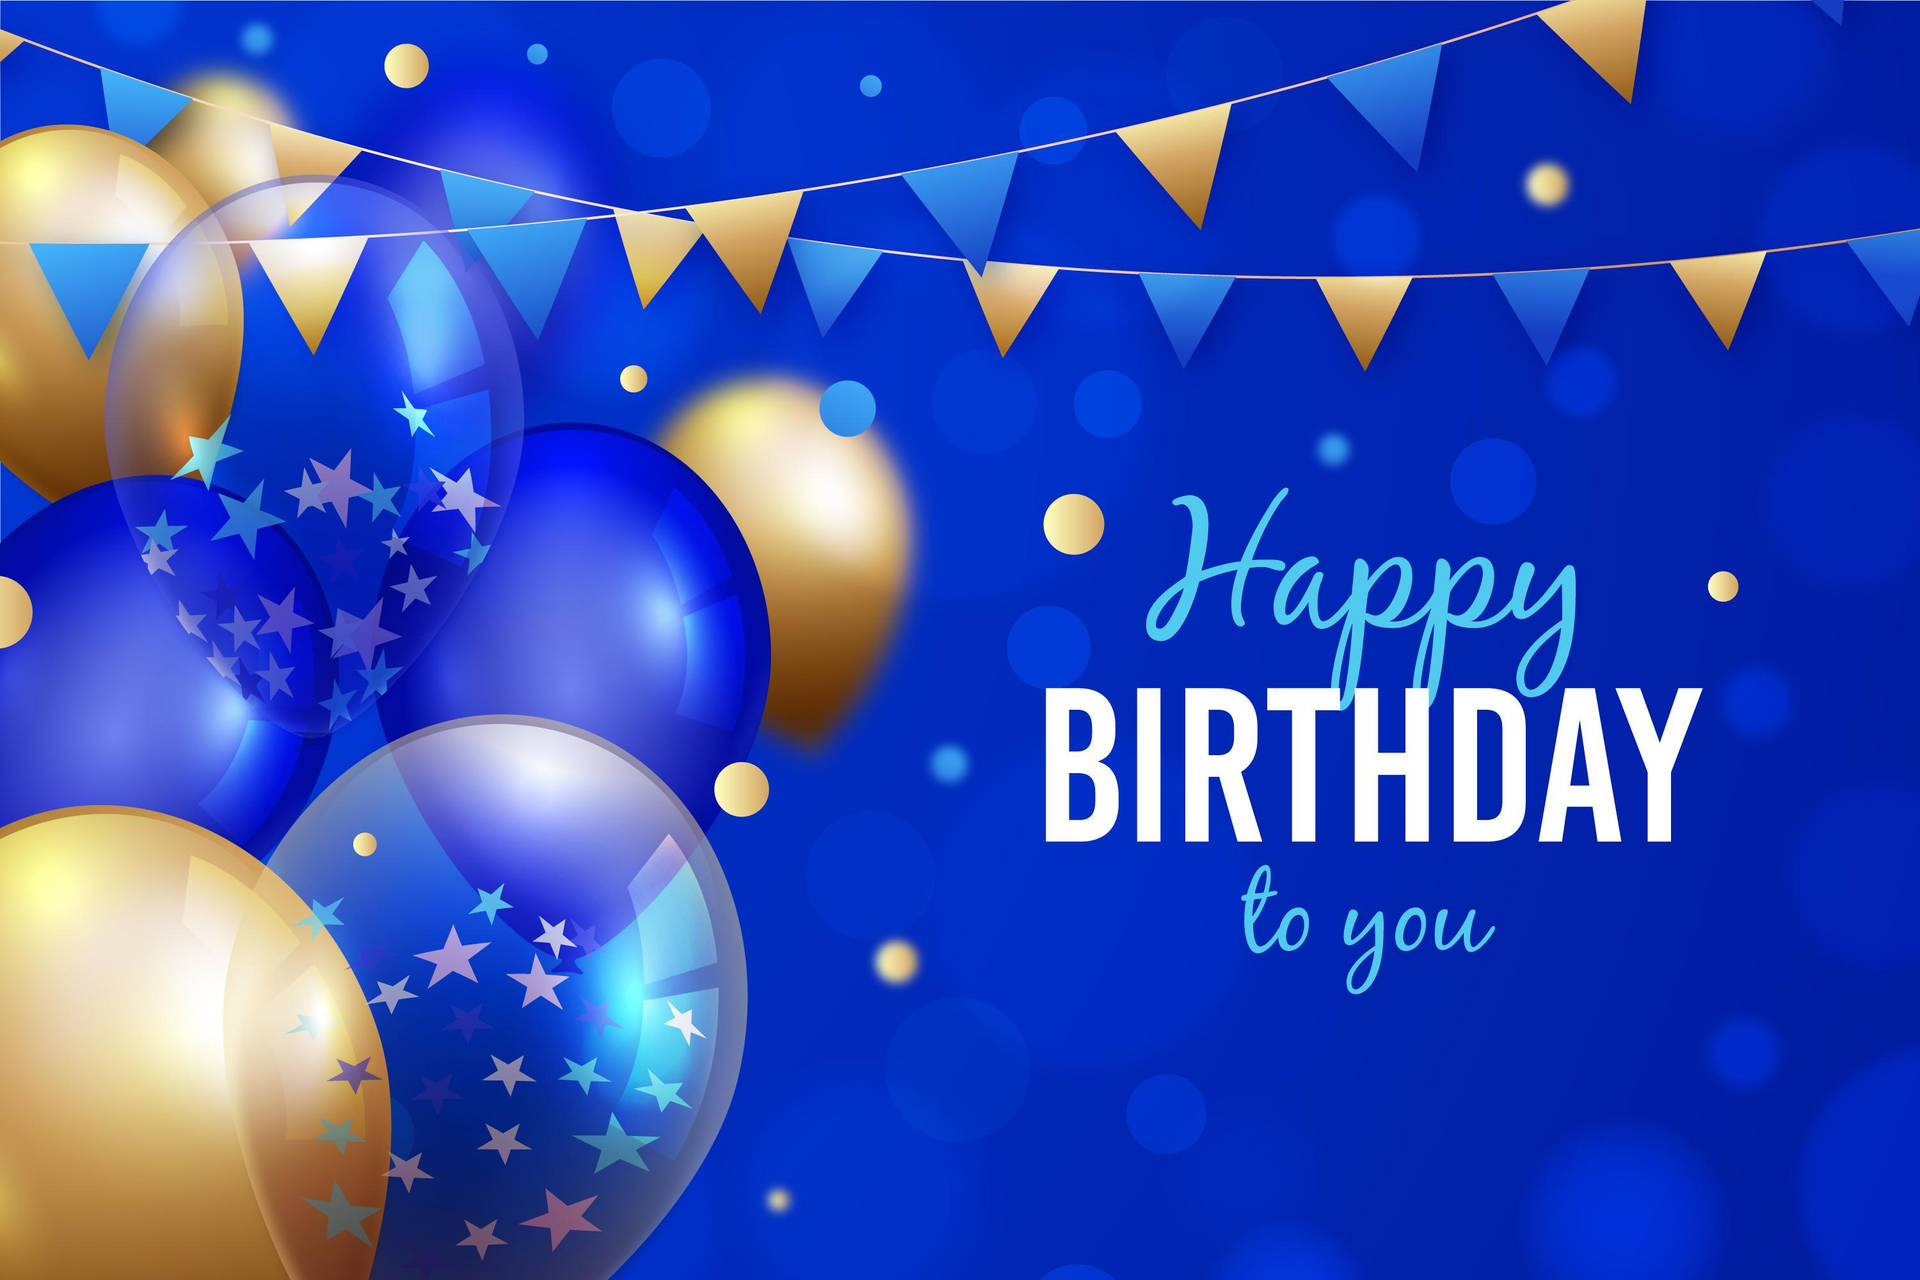 Splendid Blue and Gold Birthday Party Background Wallpaper